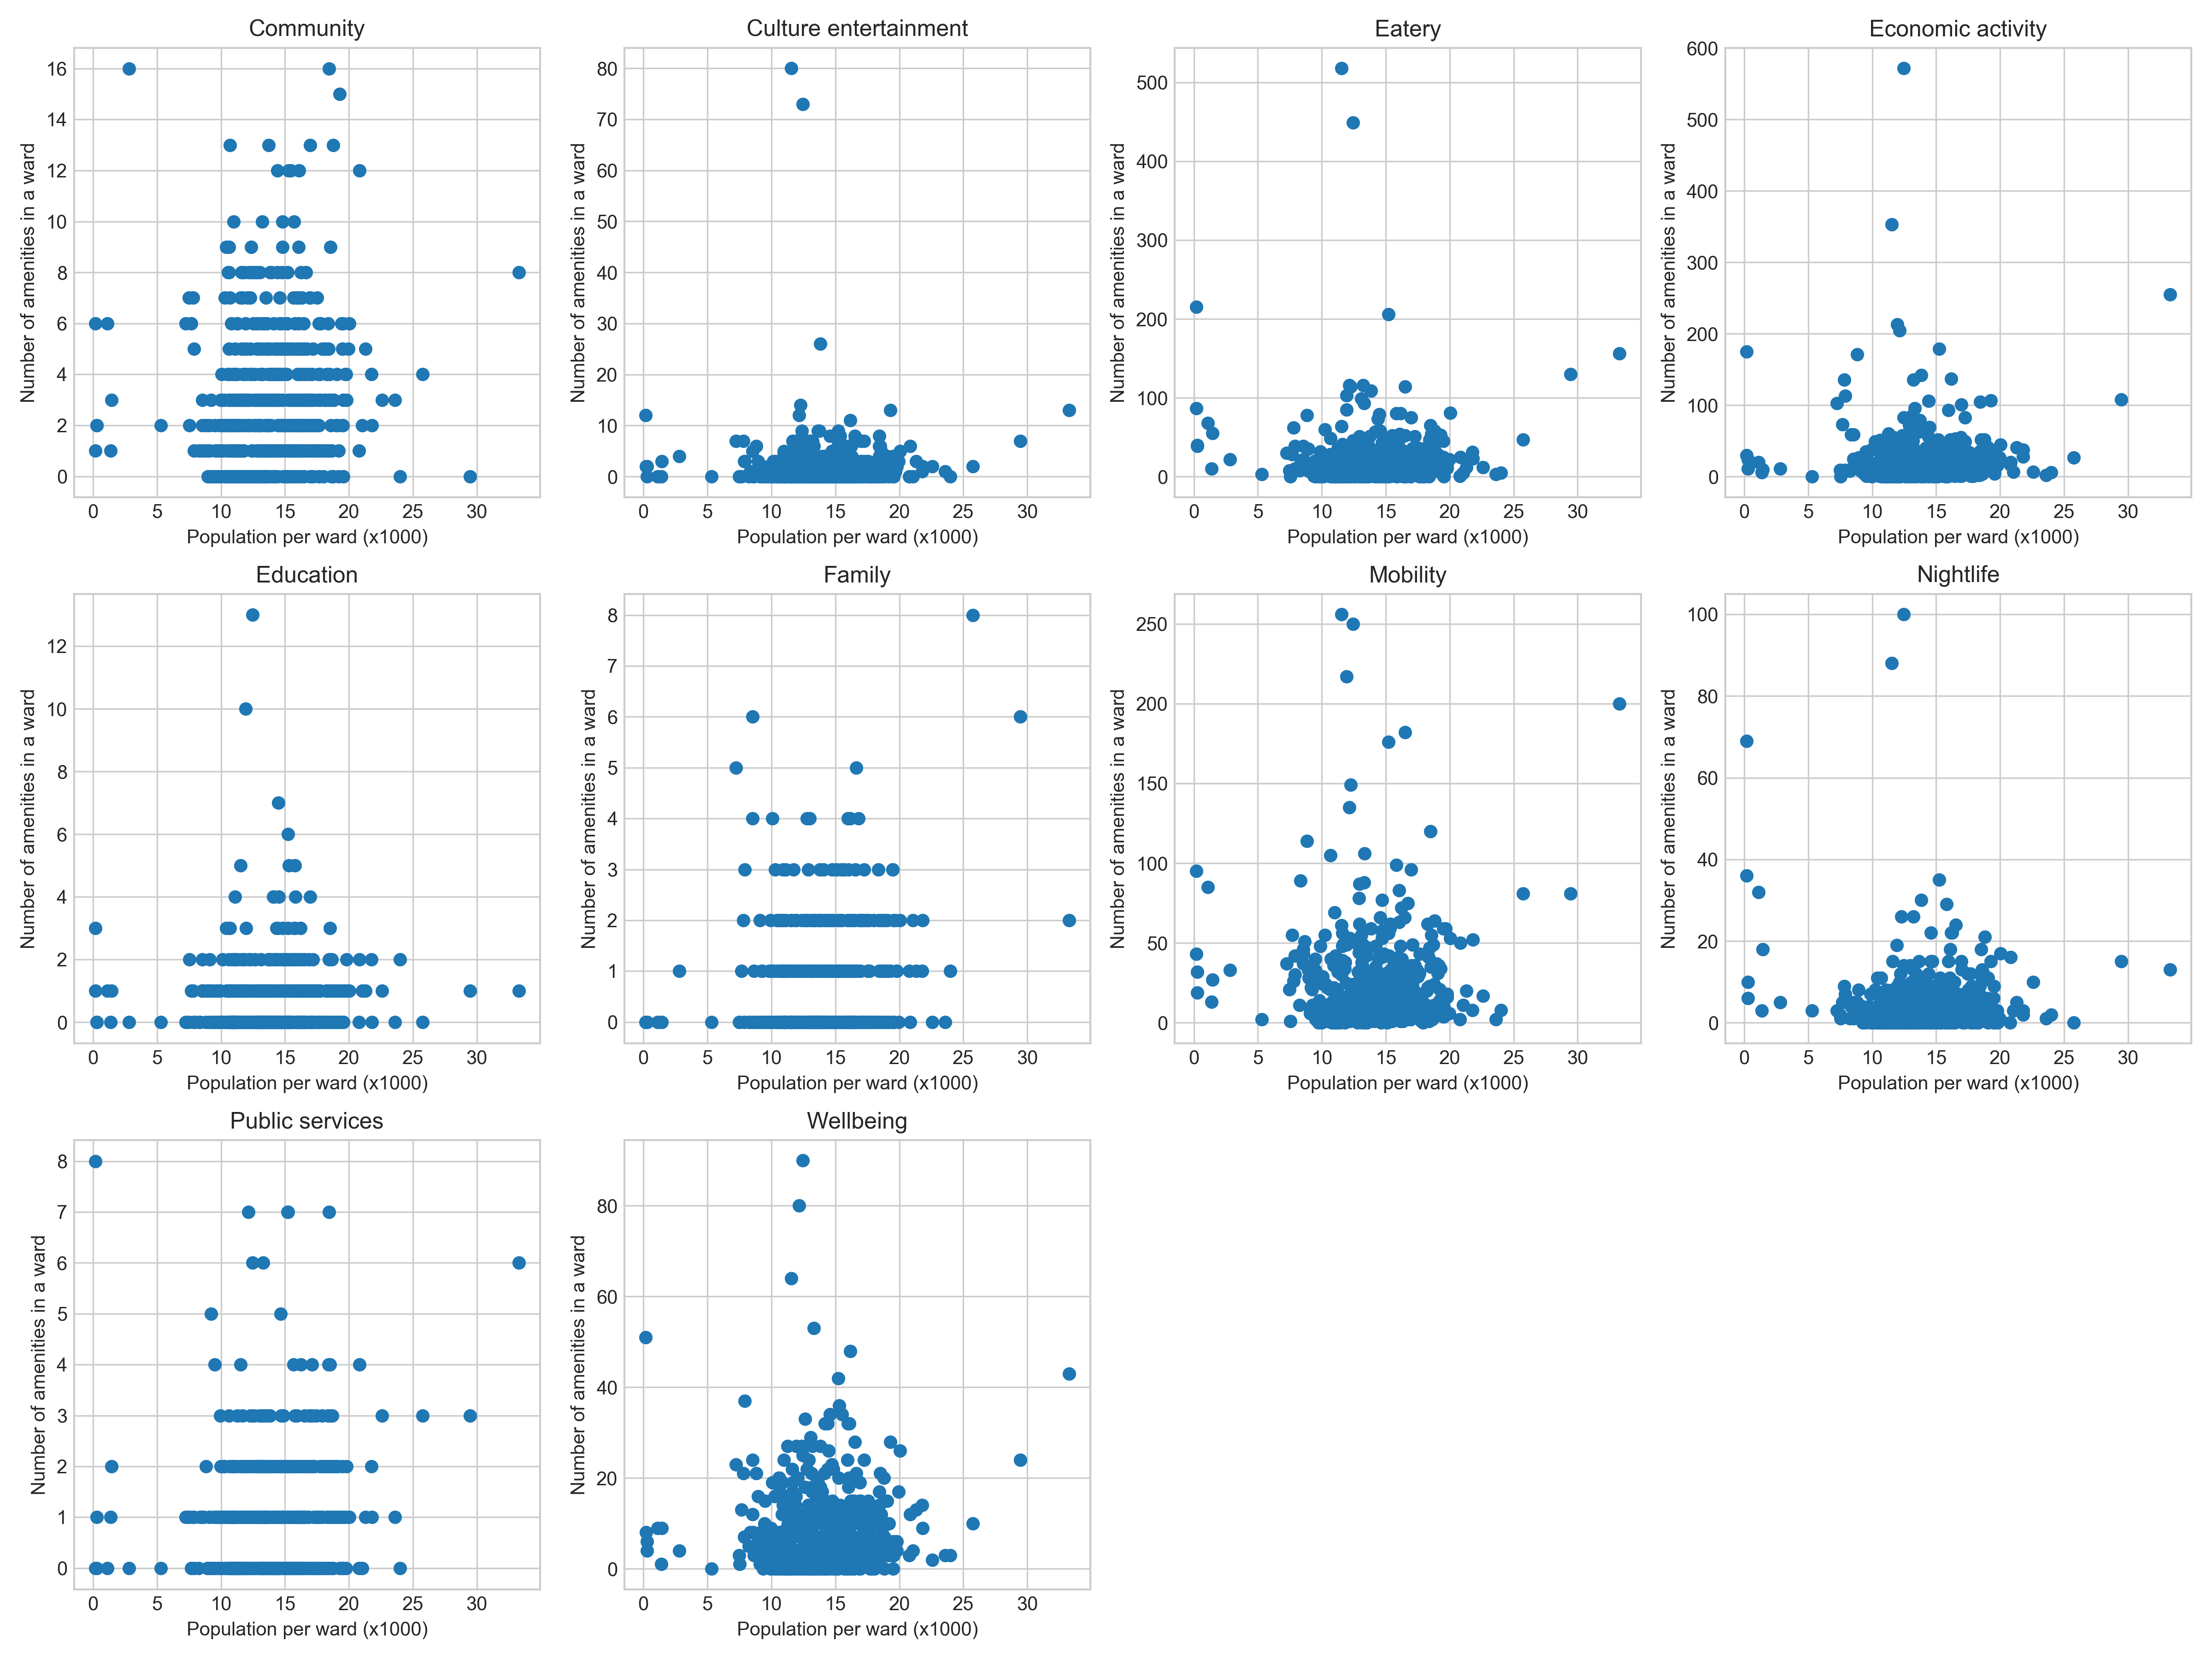 Scatterplots indicating the relationship between the number of amenities and population per sub-district.